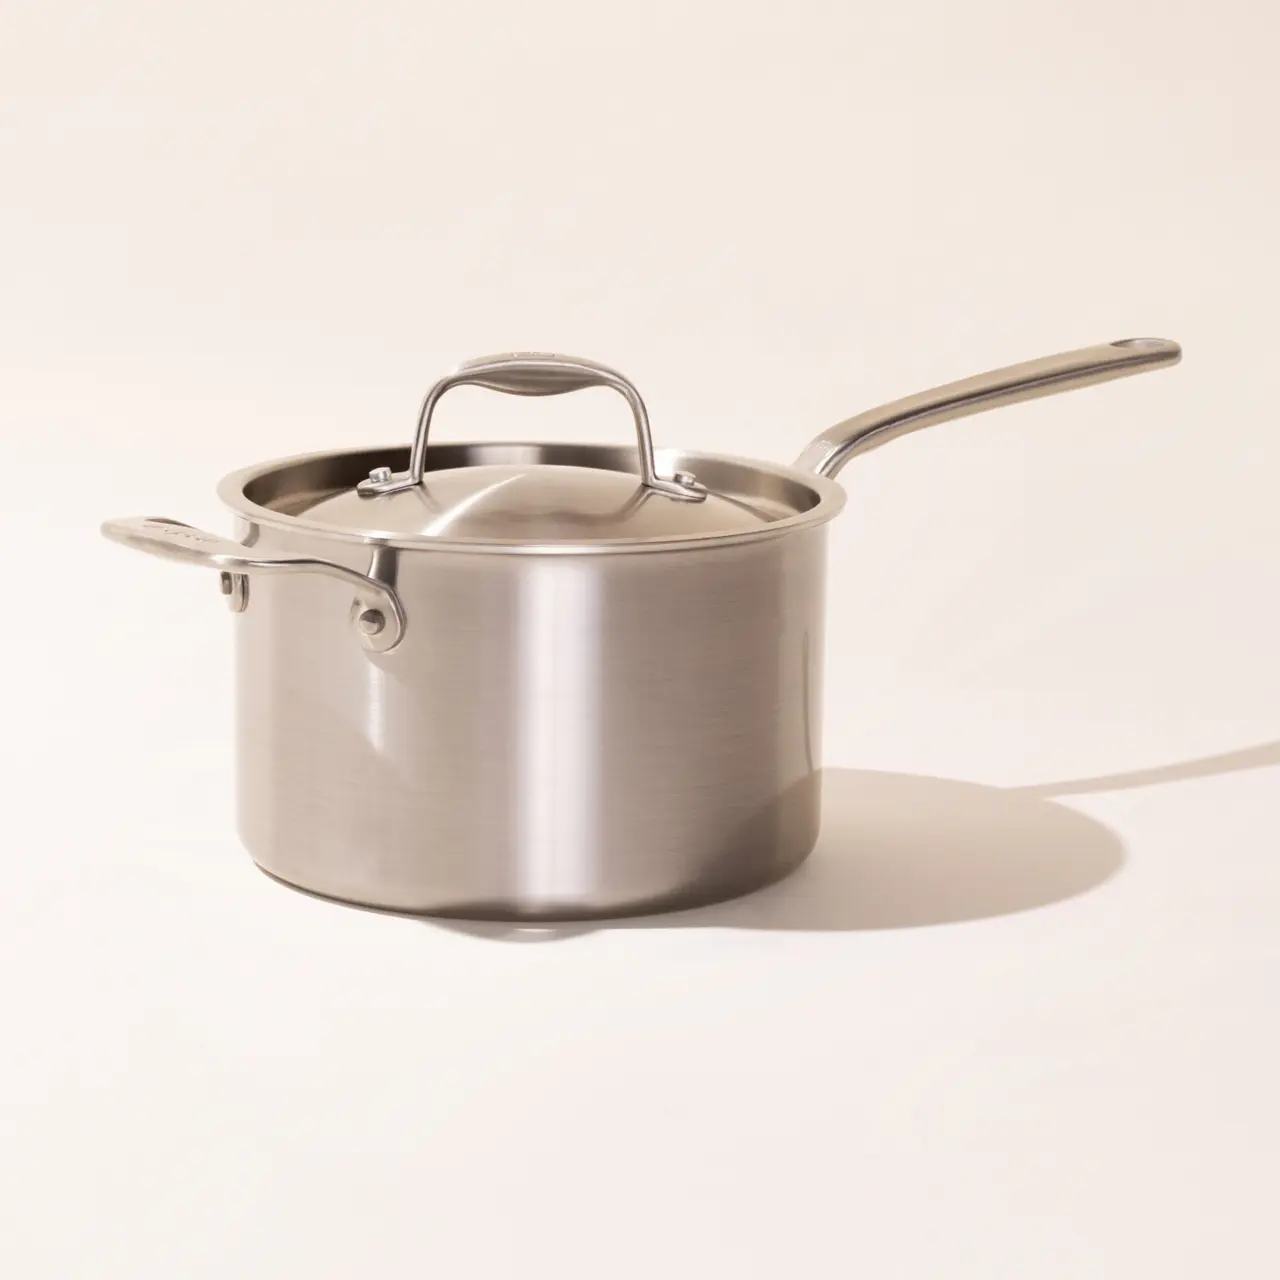 Stainless steel saucepan with a long handle and a lid on a neutral background.